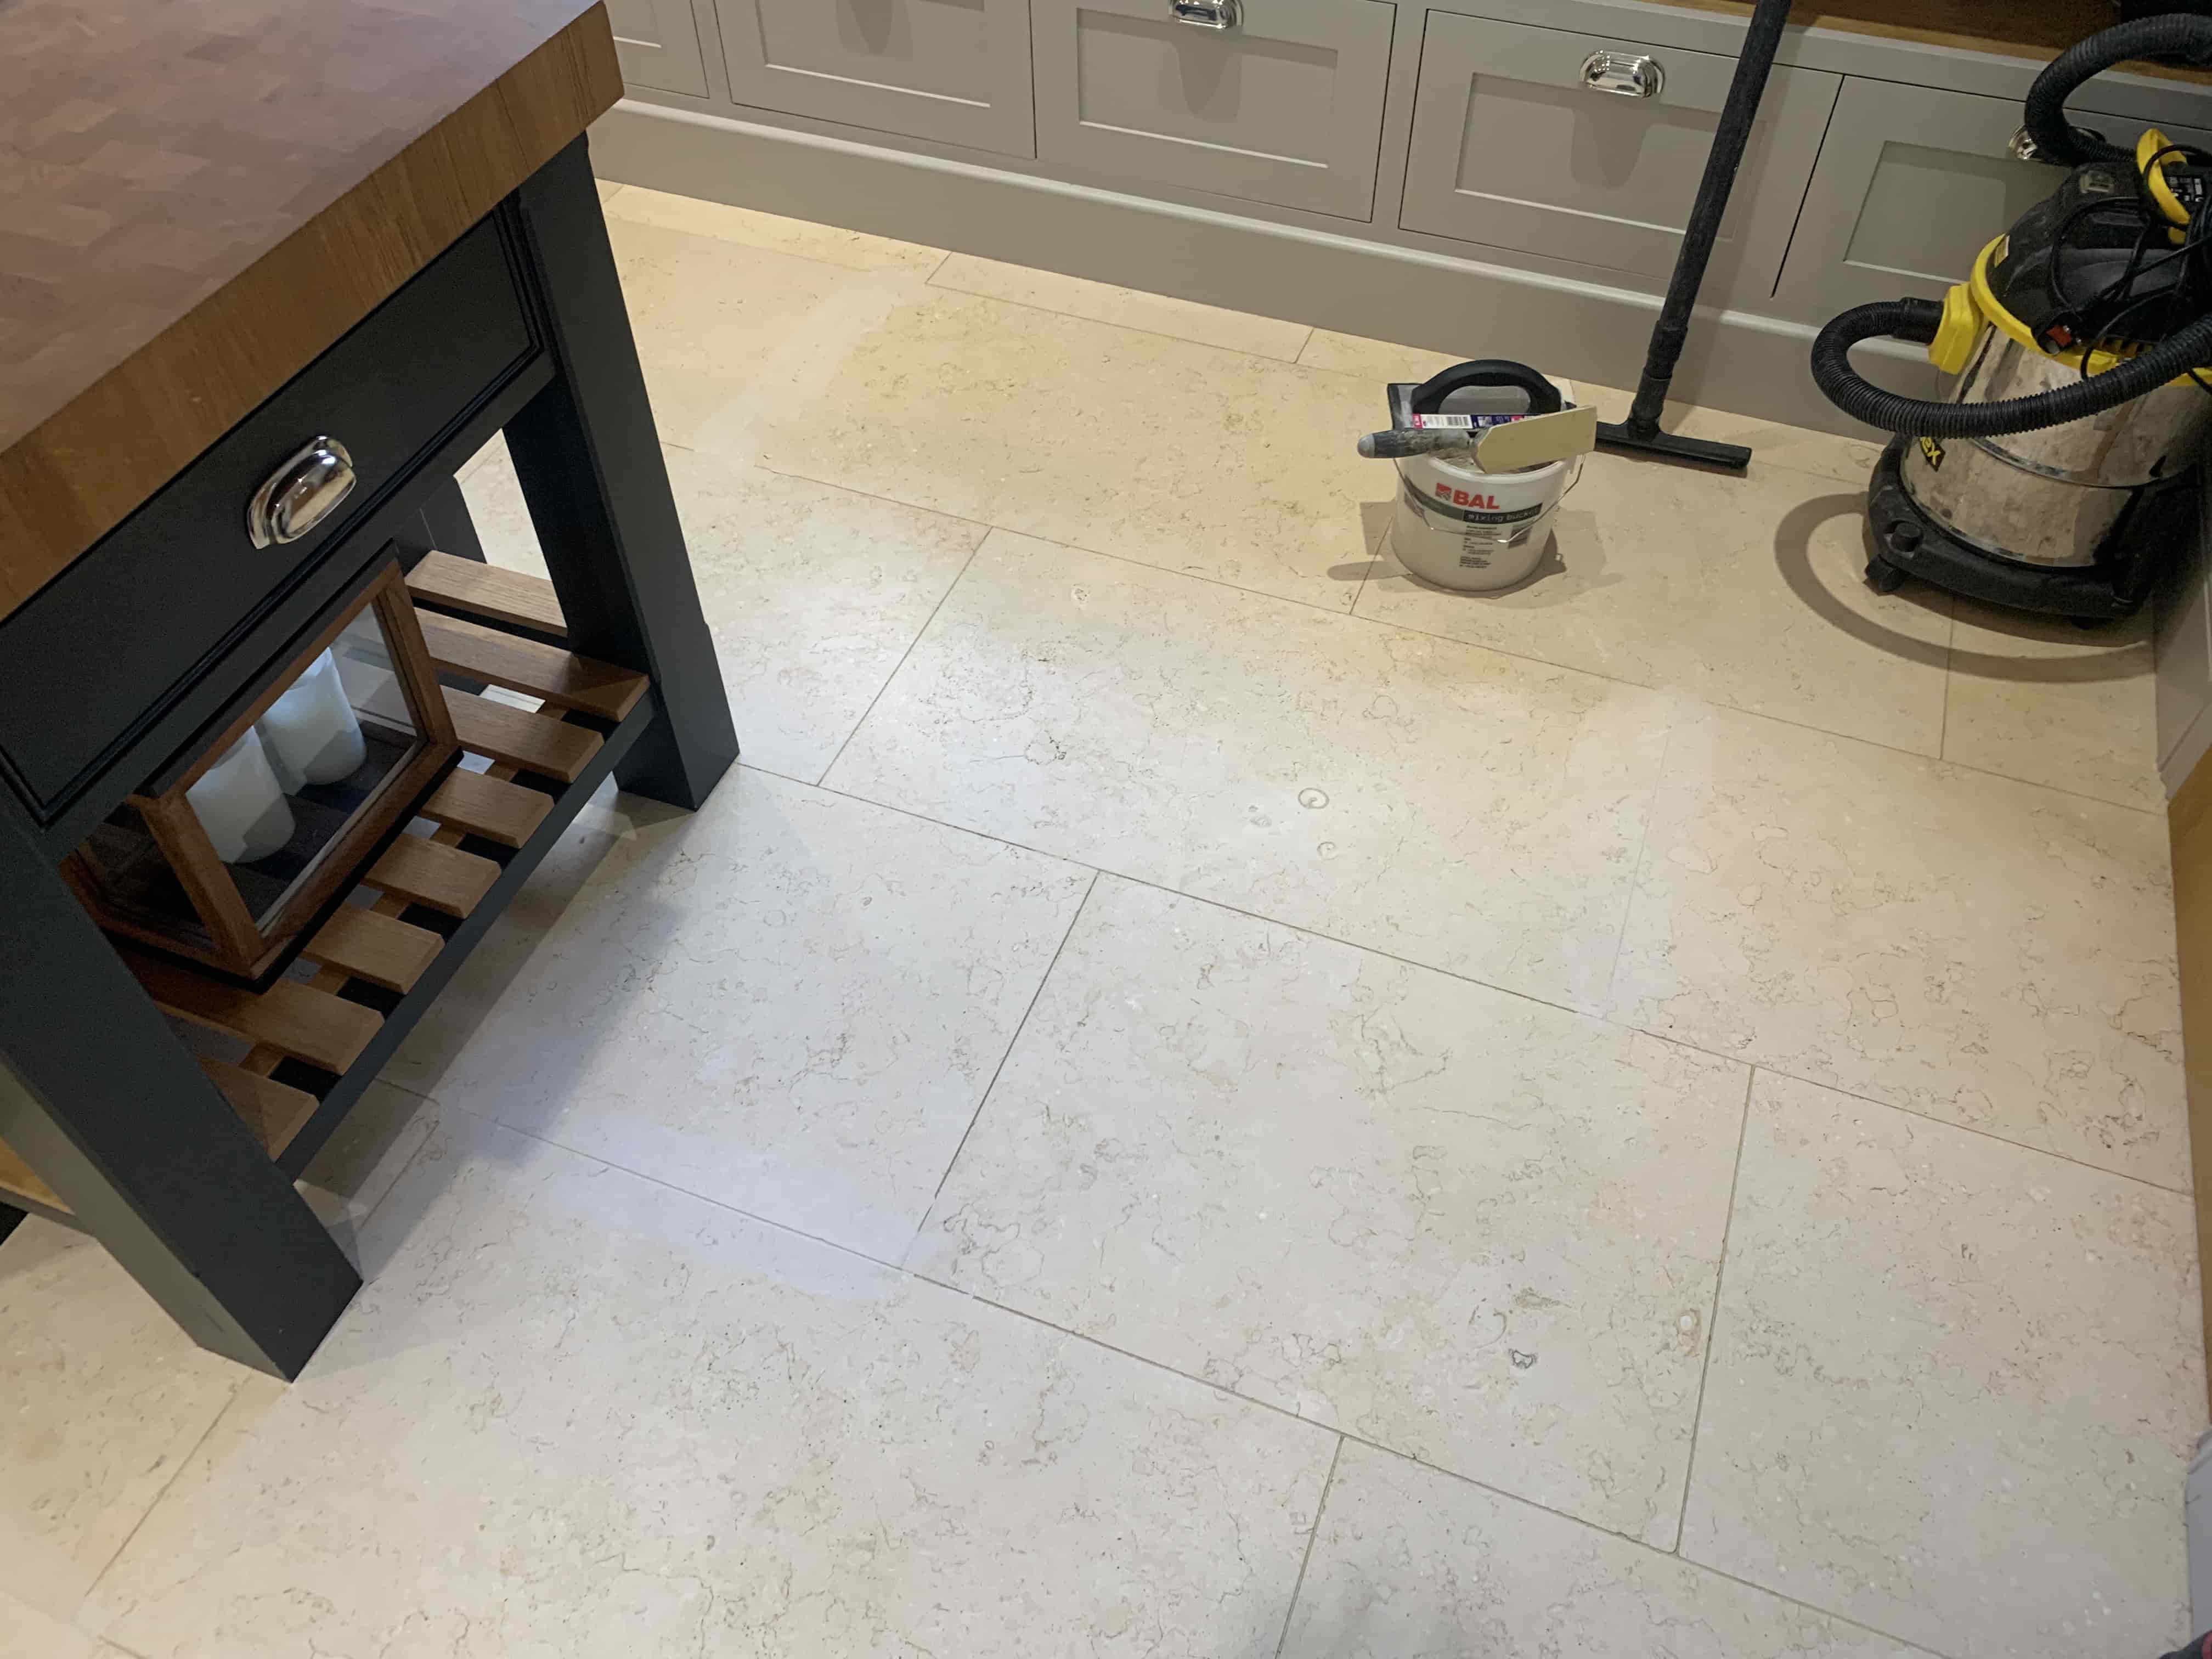 Jura Cream Honed Limestone Floor During Grout Cleaning South Kilworth